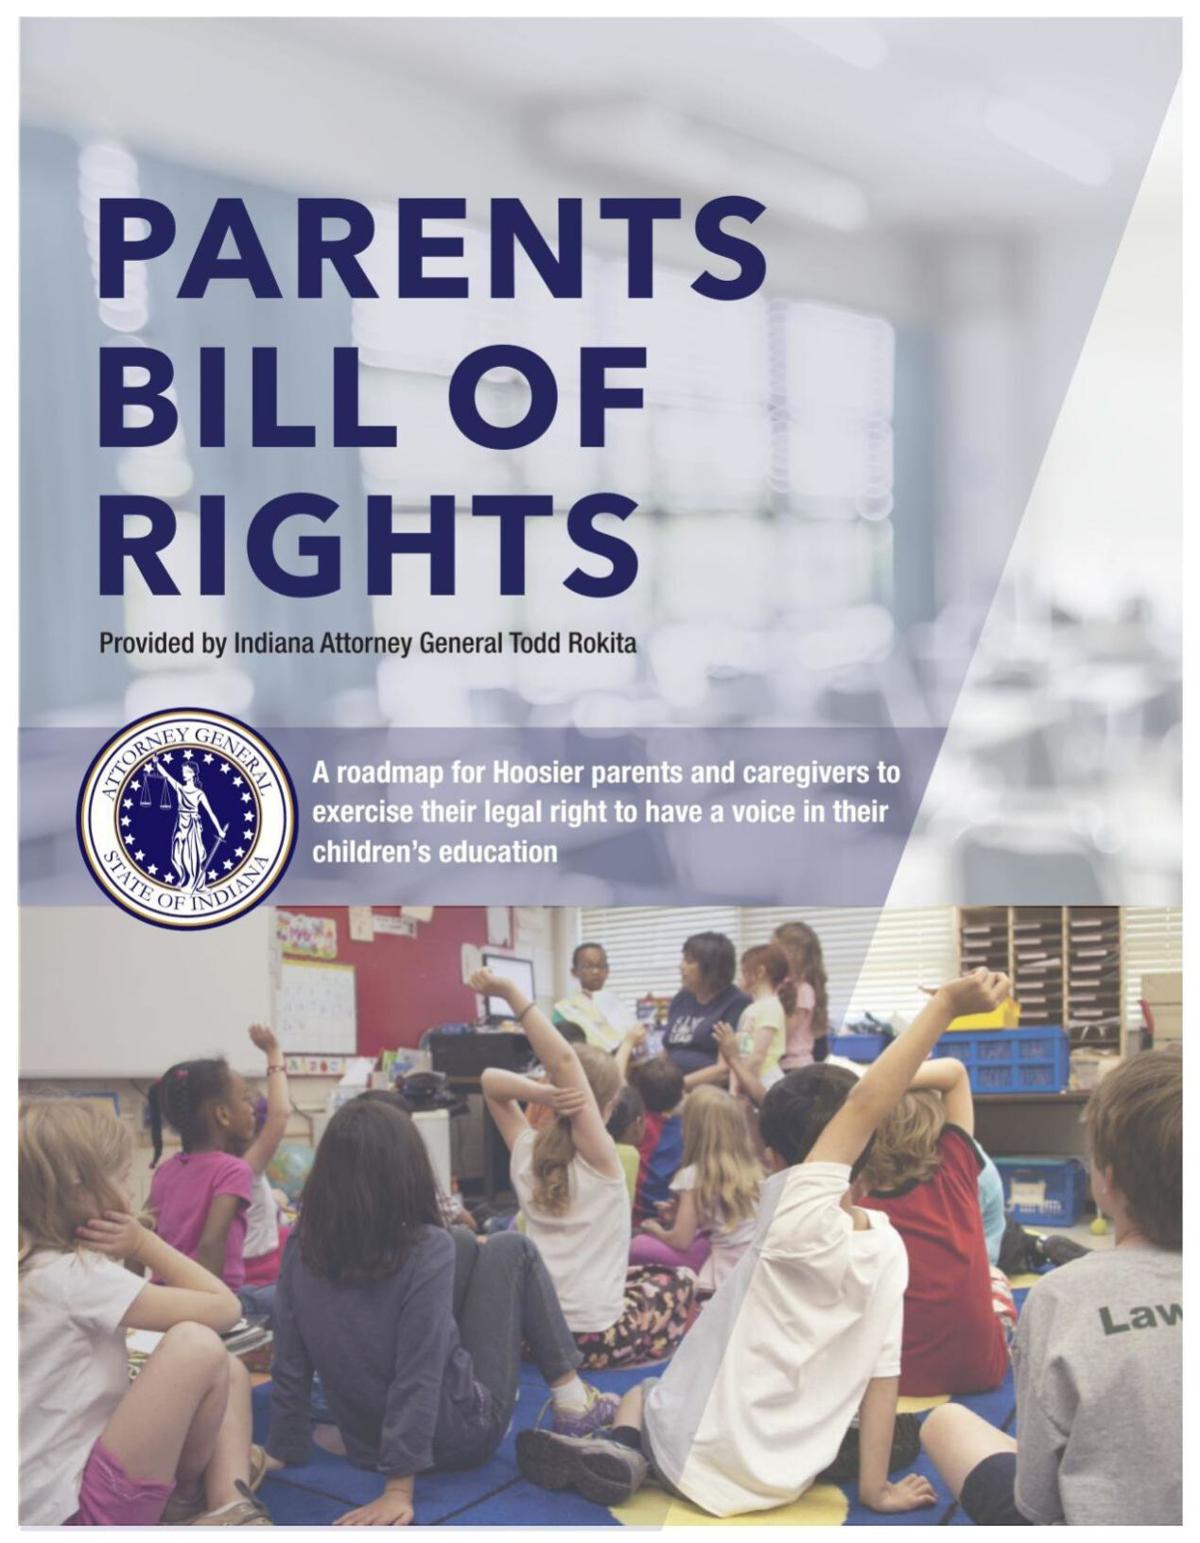 Parents Bill of Rights issued by Attorney General Todd Rokita